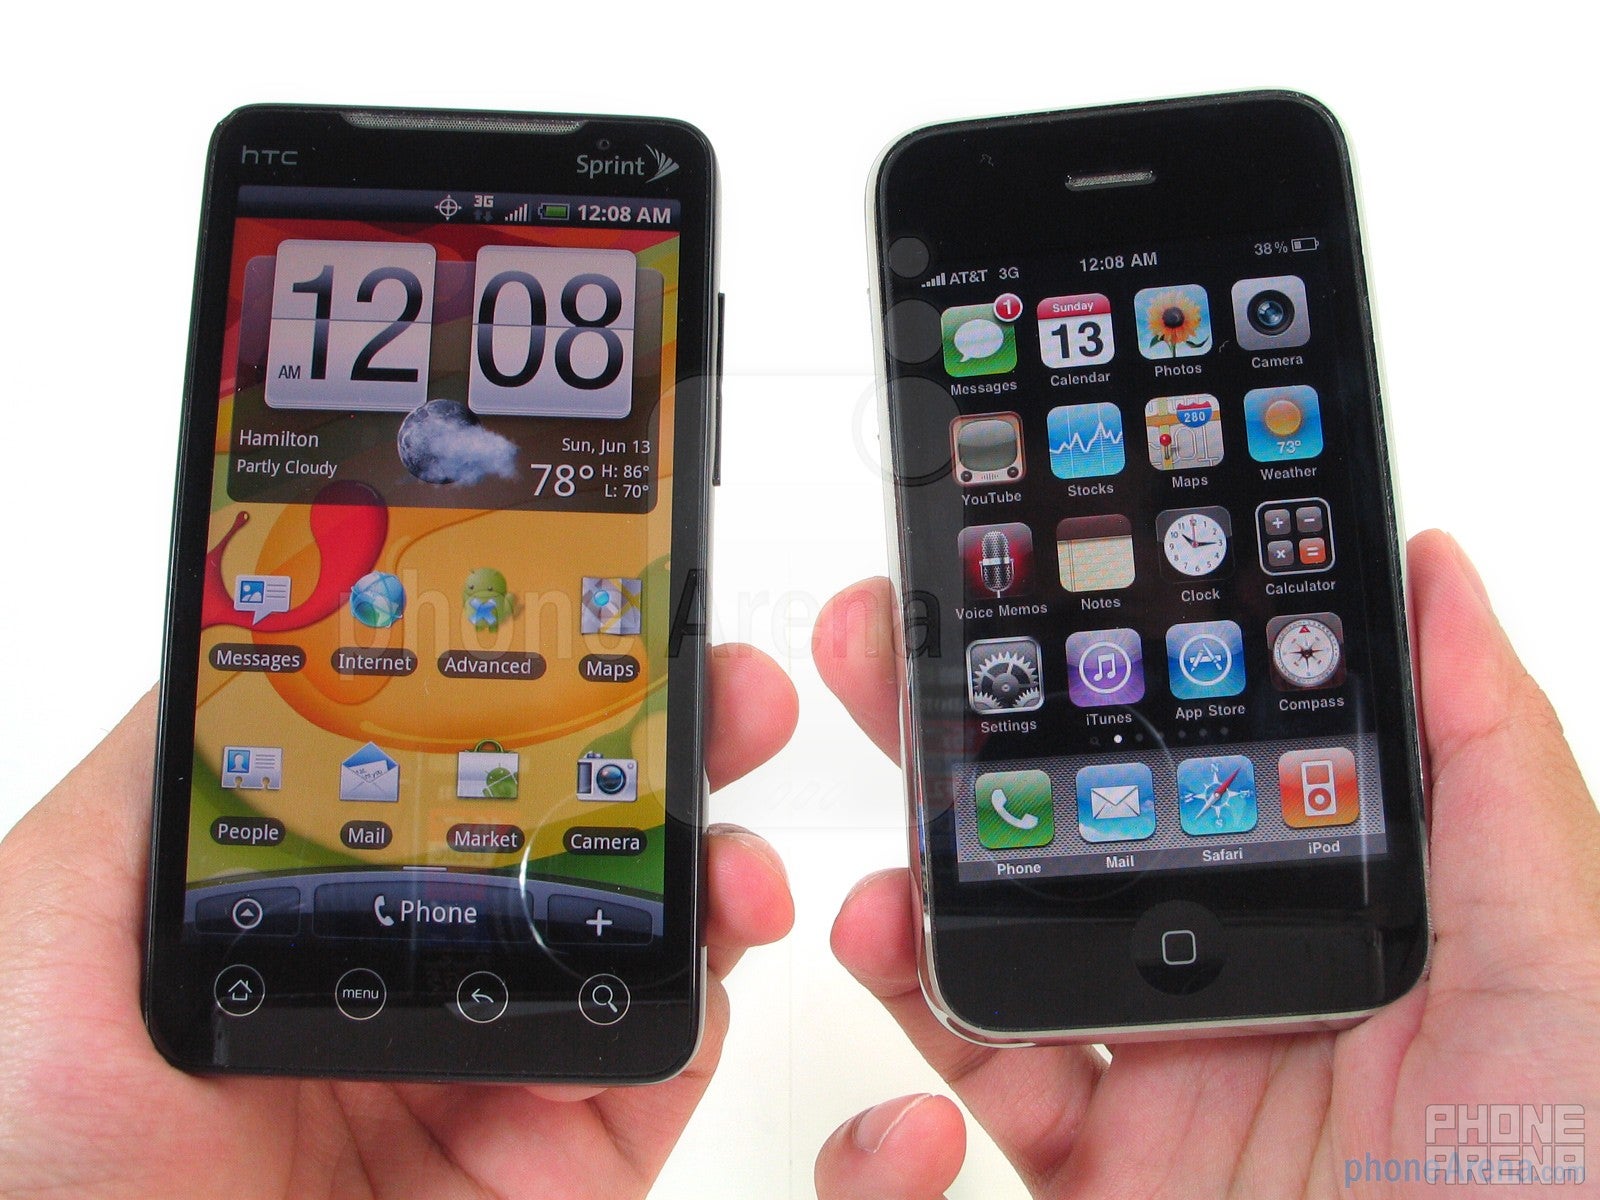 Apple iPhone 3GS and HTC EVO 4G: side by side